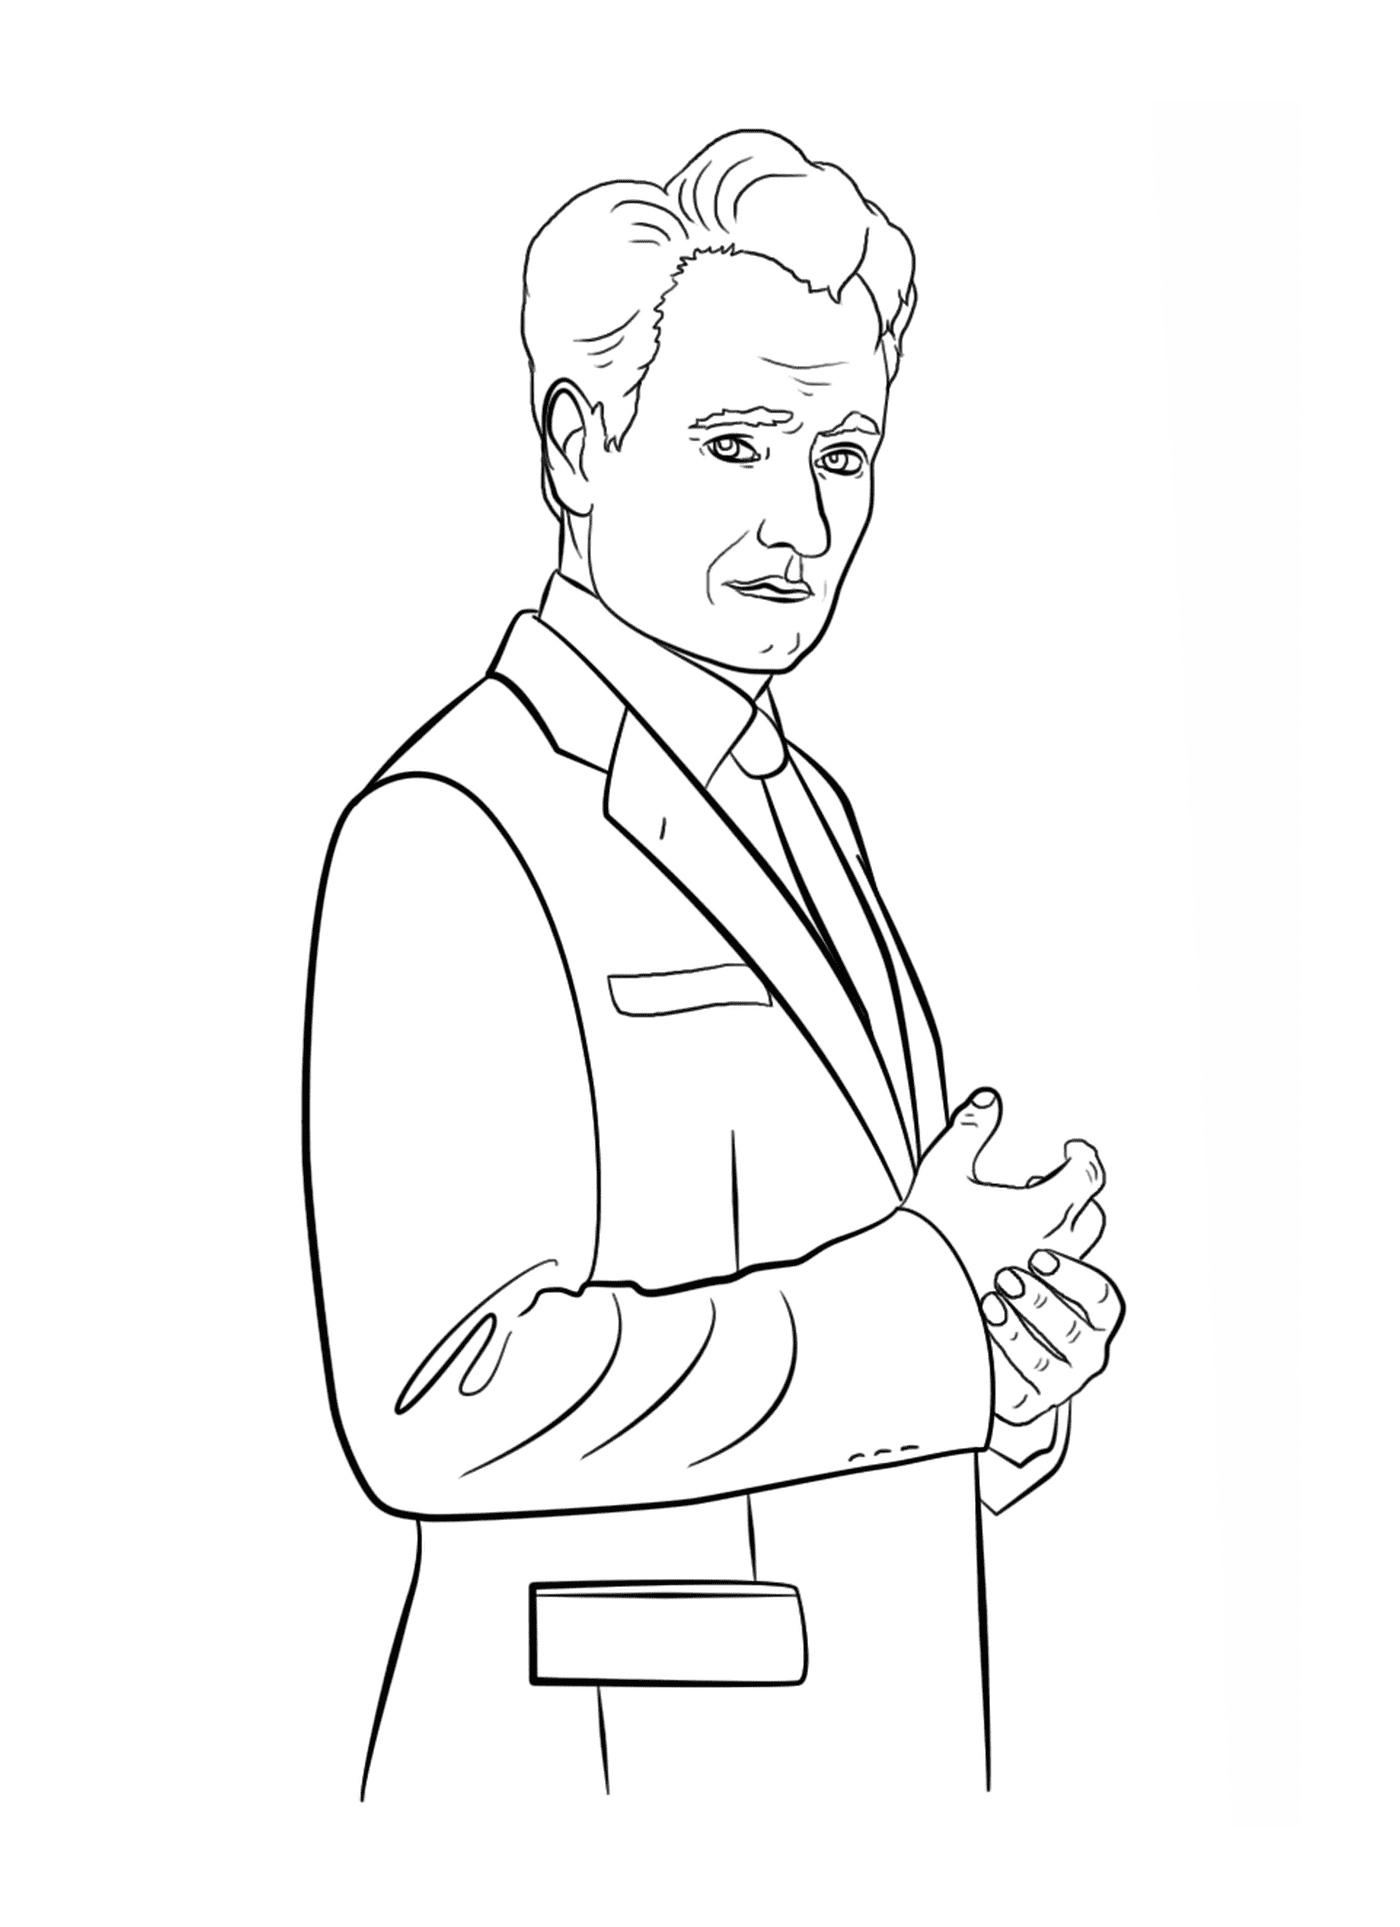  A man in a suit 